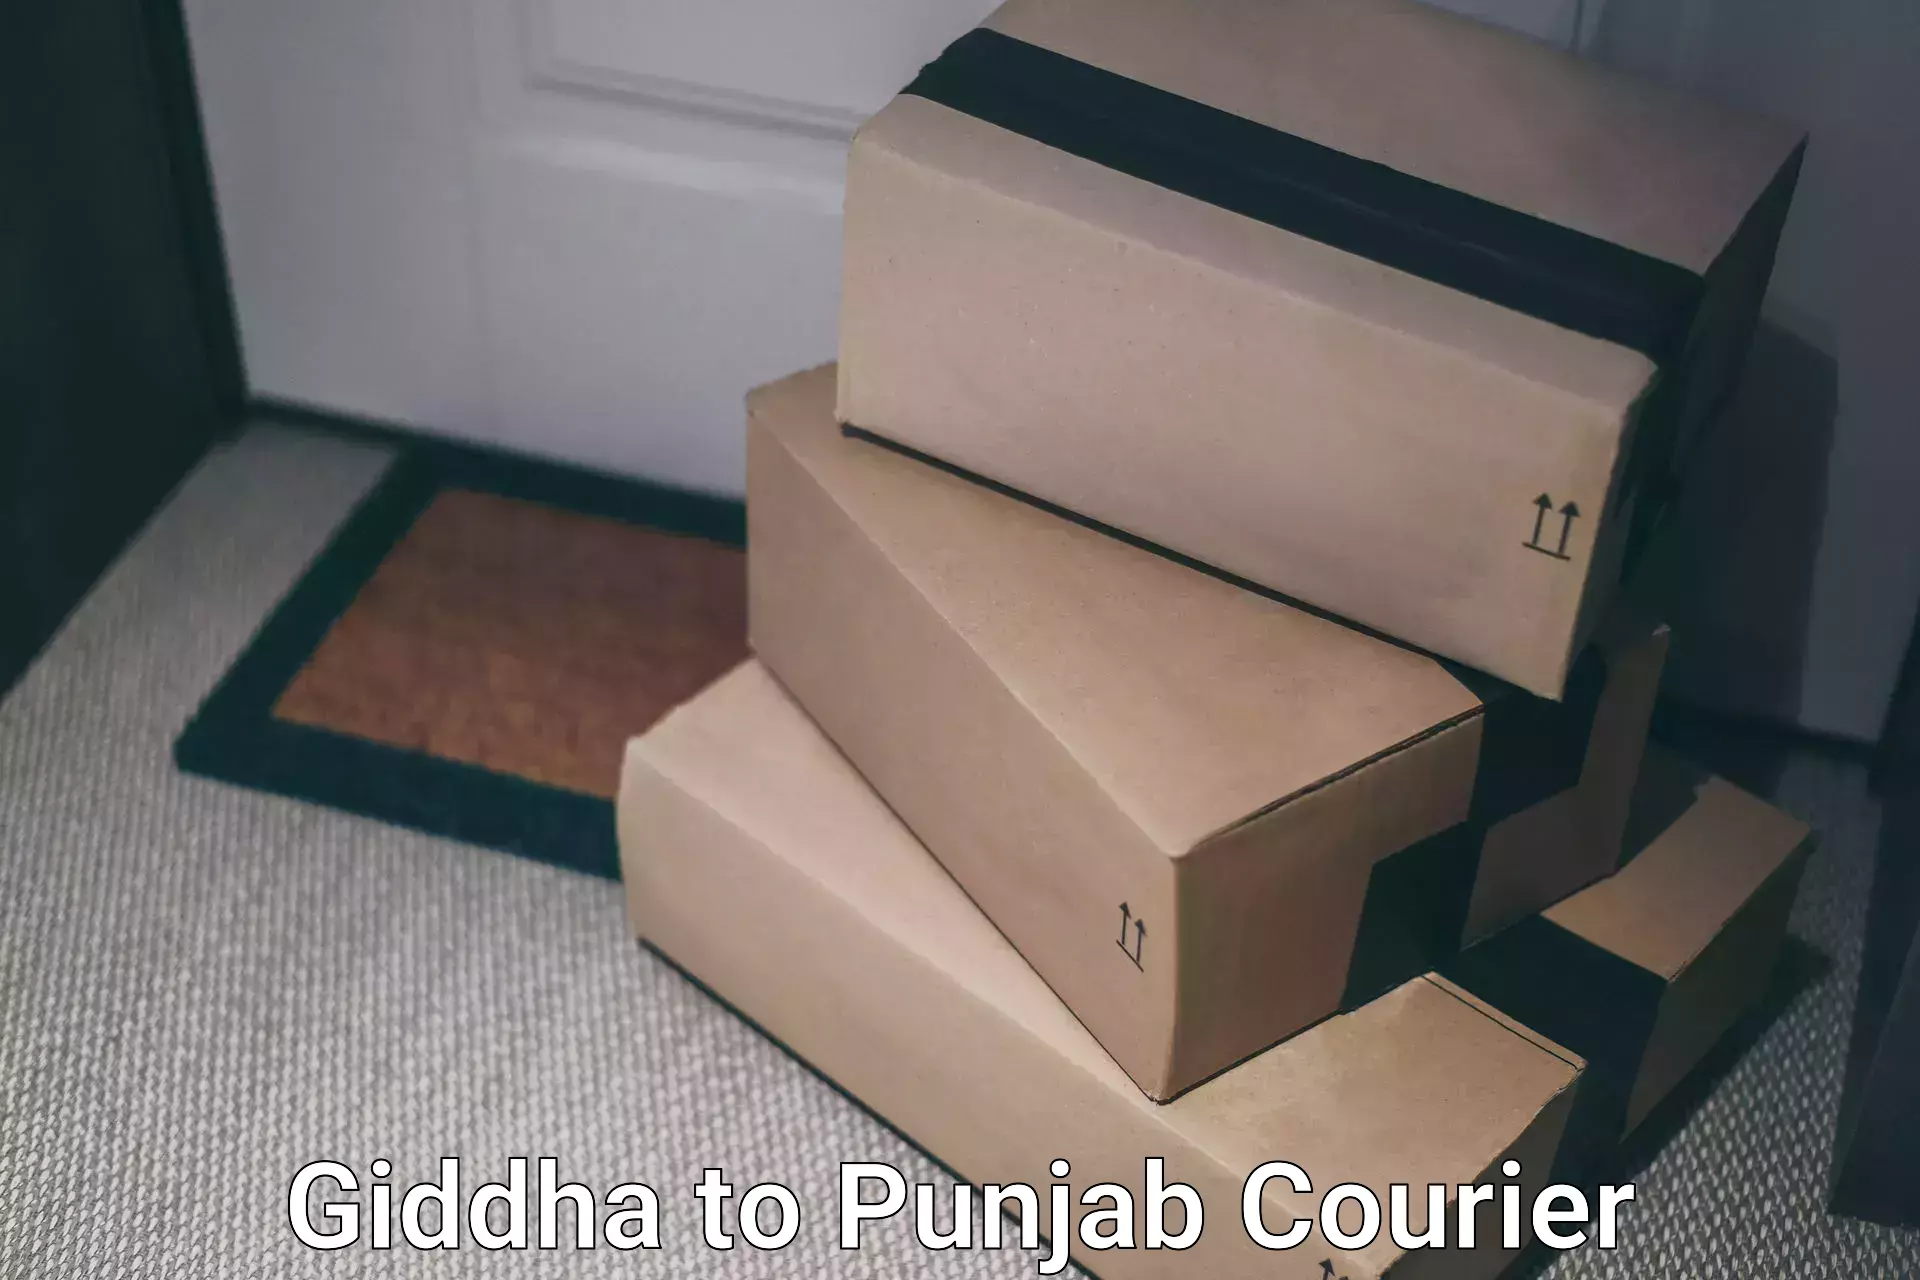 Automated parcel services Giddha to Ajnala